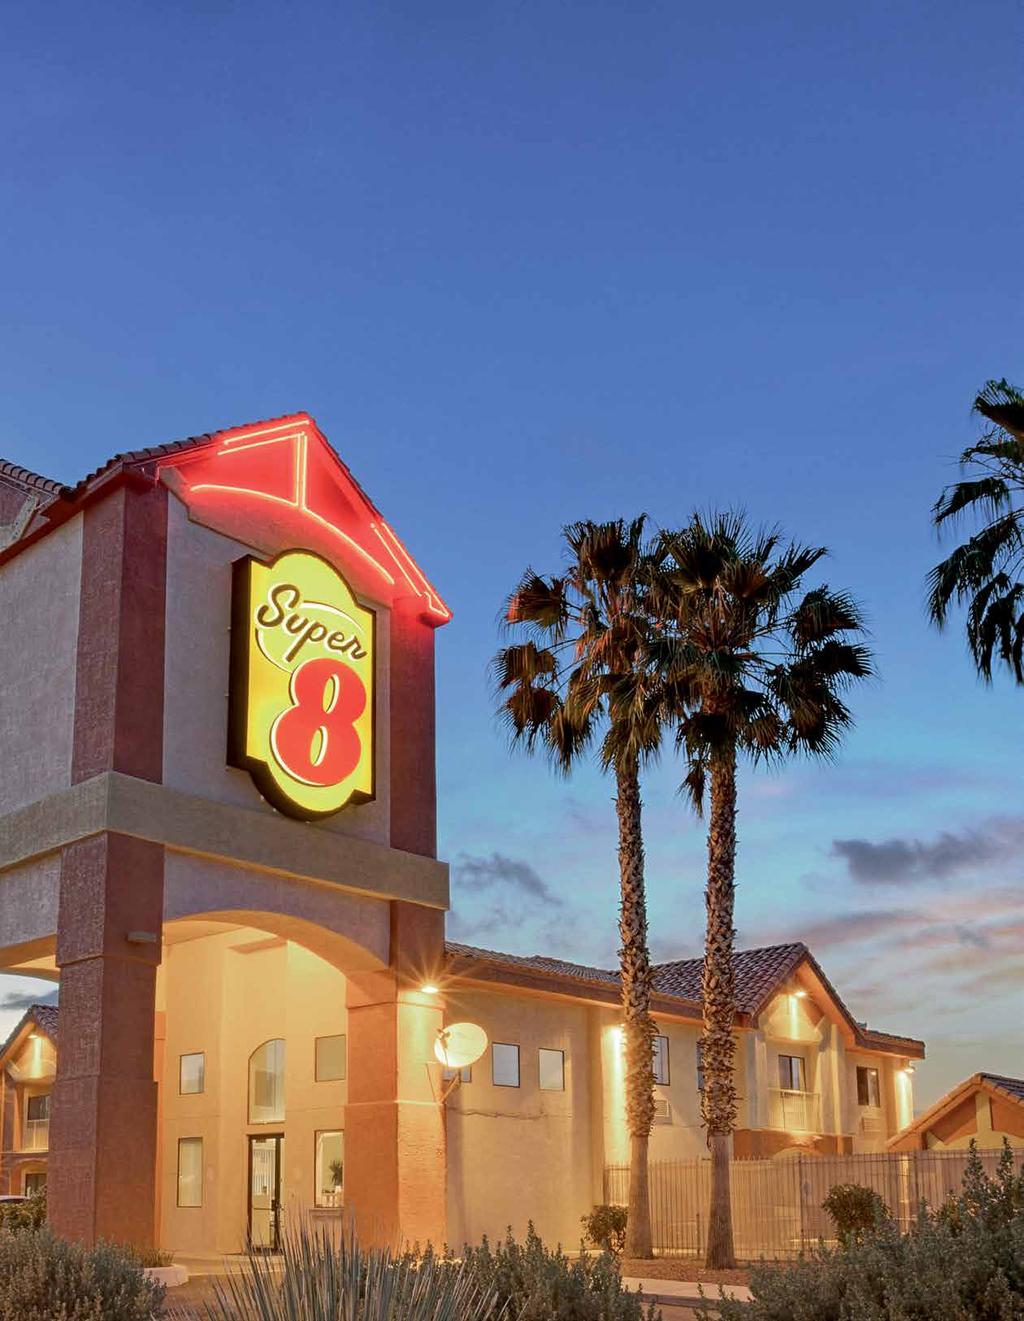 BEING RECOGNIZED HAS ITS ADVANTAGES SUPER 8 IS EVERYWHERE THERE IS UNPARALLELED POWER IN THE YELLOW- AND-RED SIGN THAT REPRESENTS AN ICONIC AMERICAN BRAND.